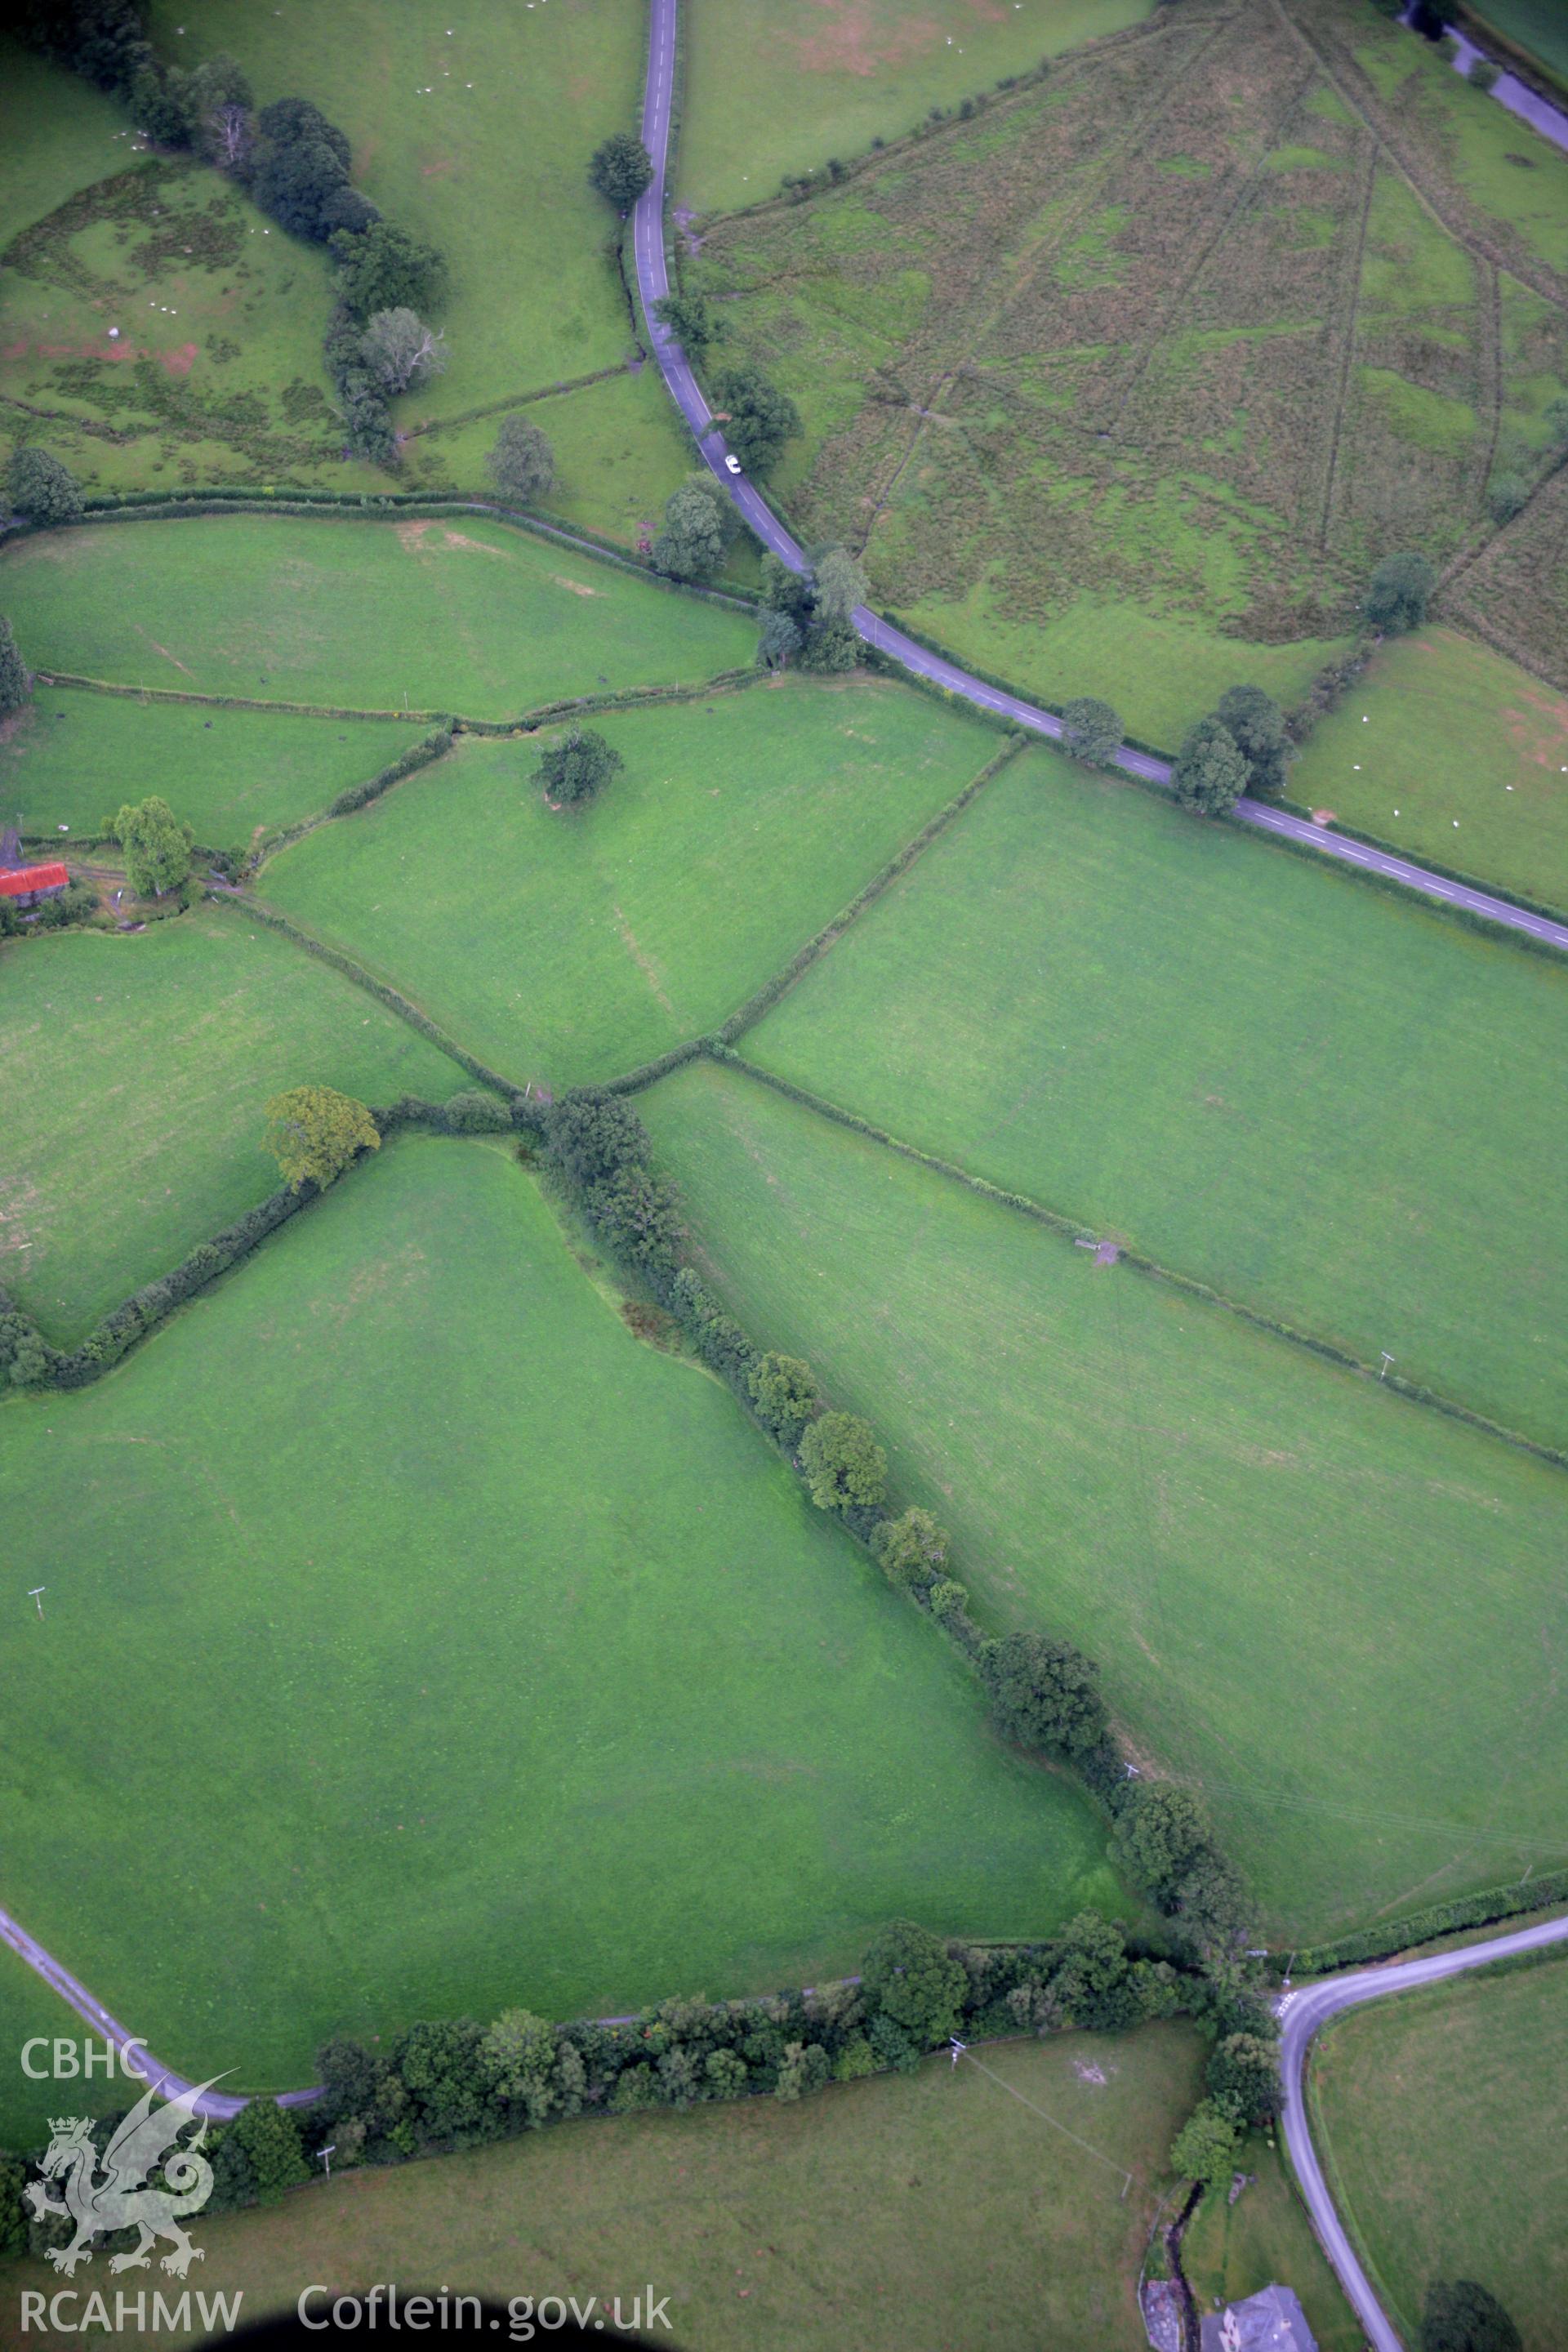 RCAHMW colour oblique aerial photograph of Caer Gai Roman Military Settlement and the nearby Roman road. Taken on 31 July 2006 by Toby Driver.